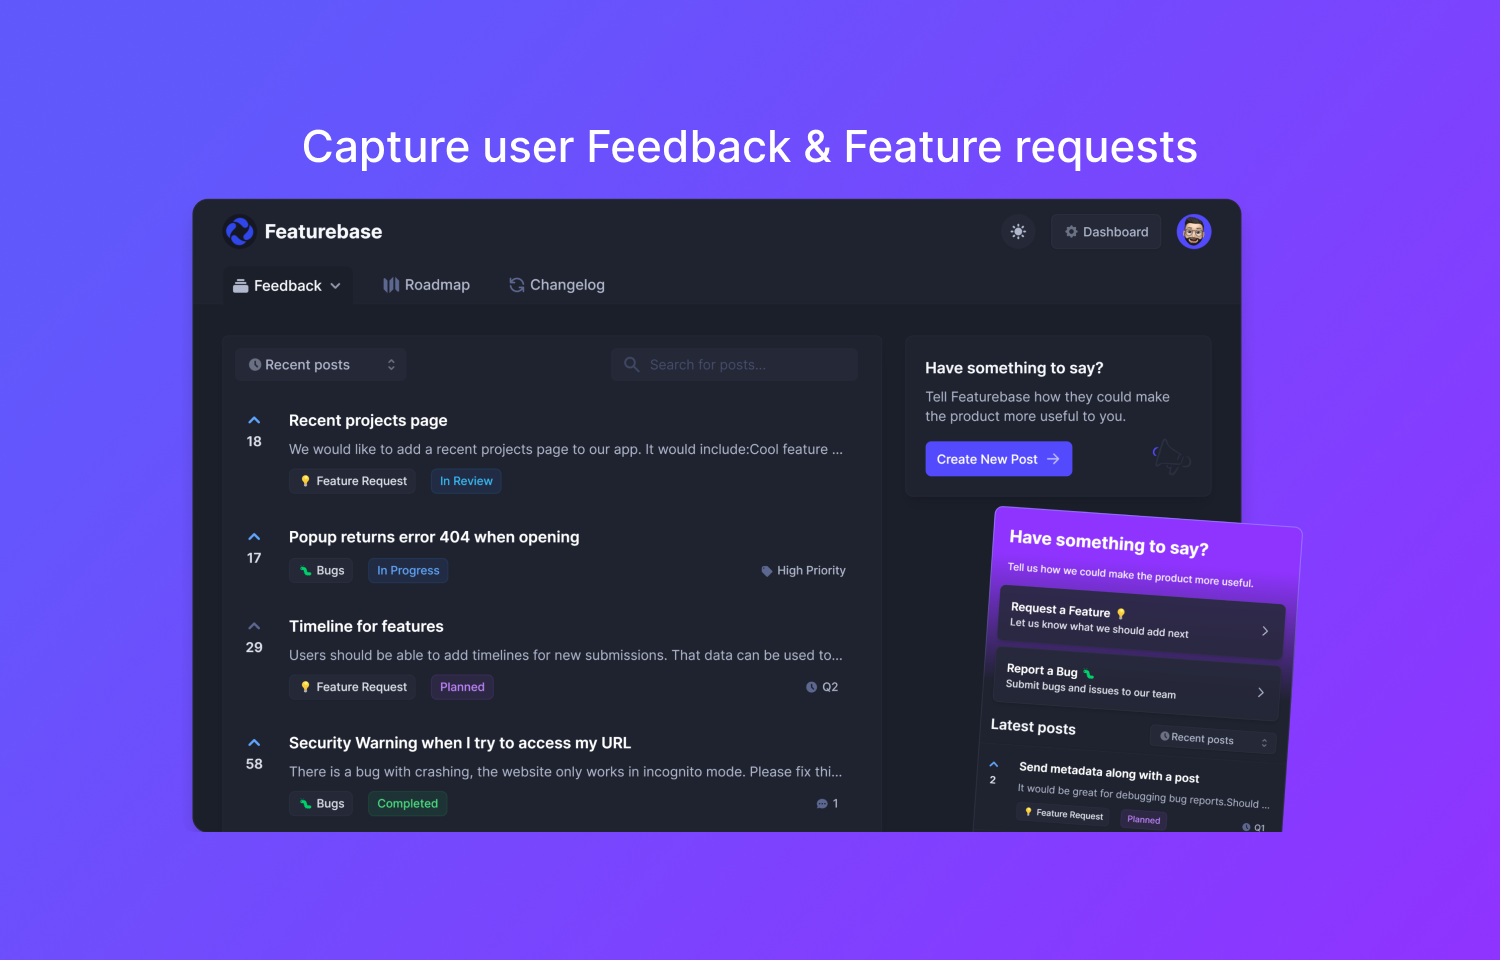 Featurebase interface showing feedback and feature requests